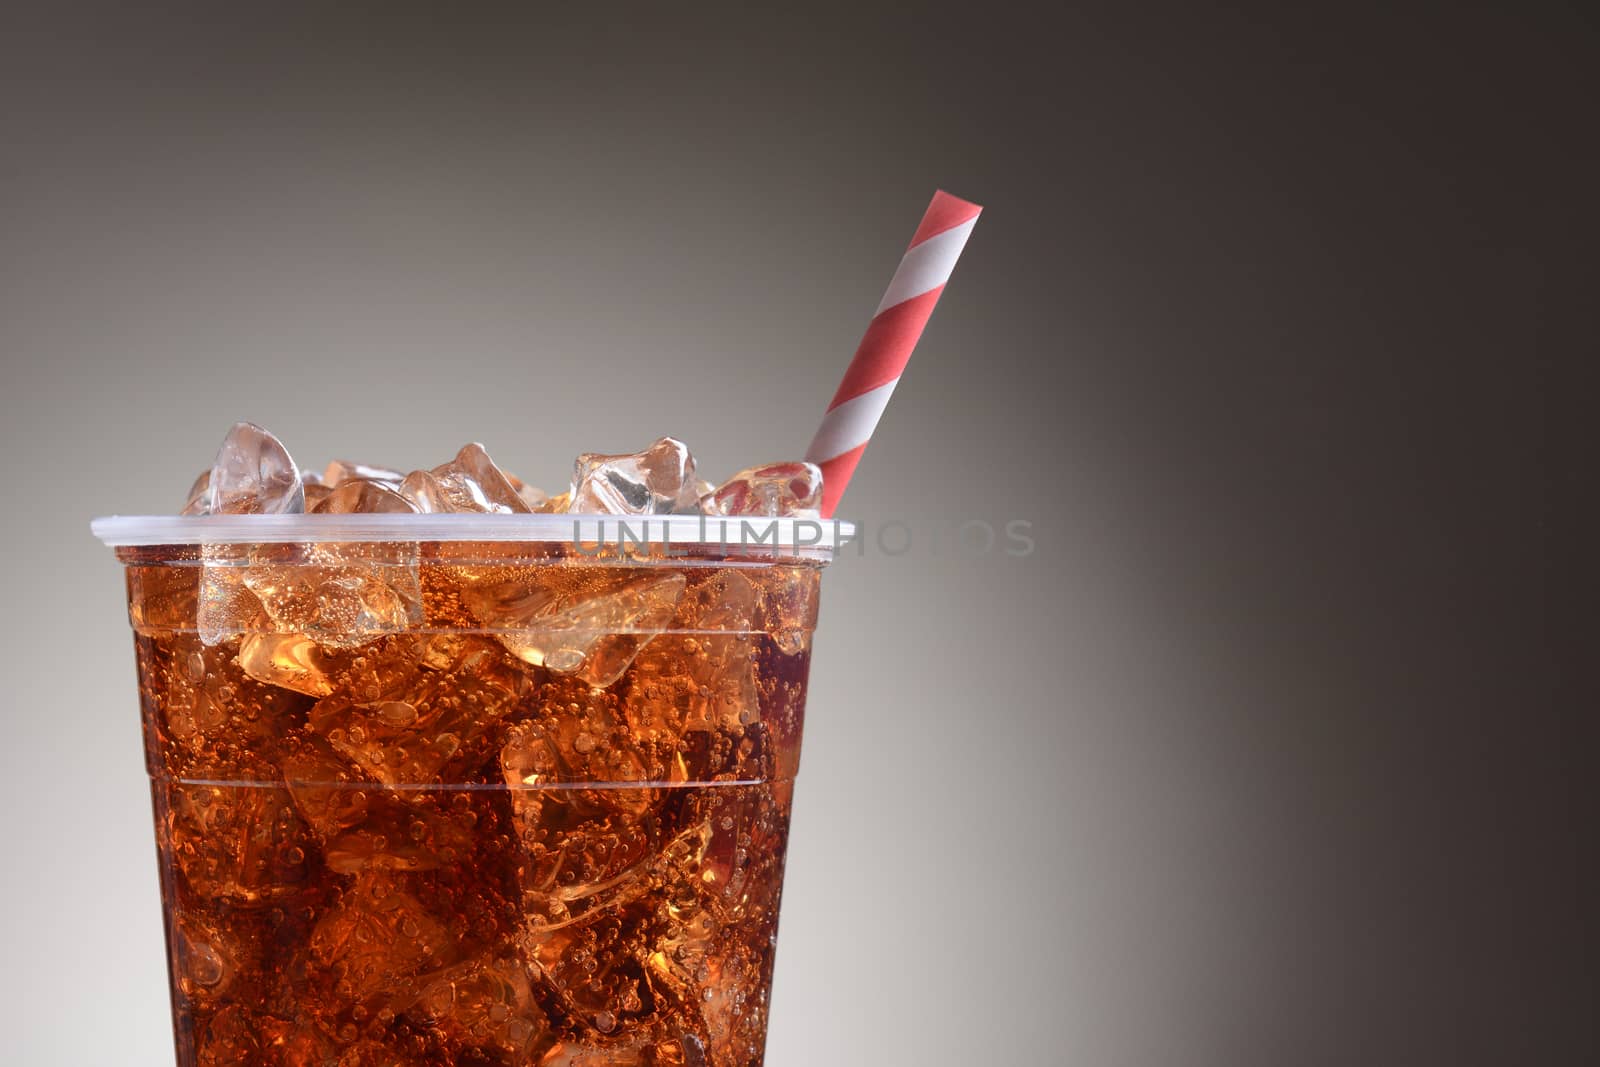 A clear plastic cup filled with ice and cola. Only half the cup is shown with a red and white striped straw over a light to dark gray background.